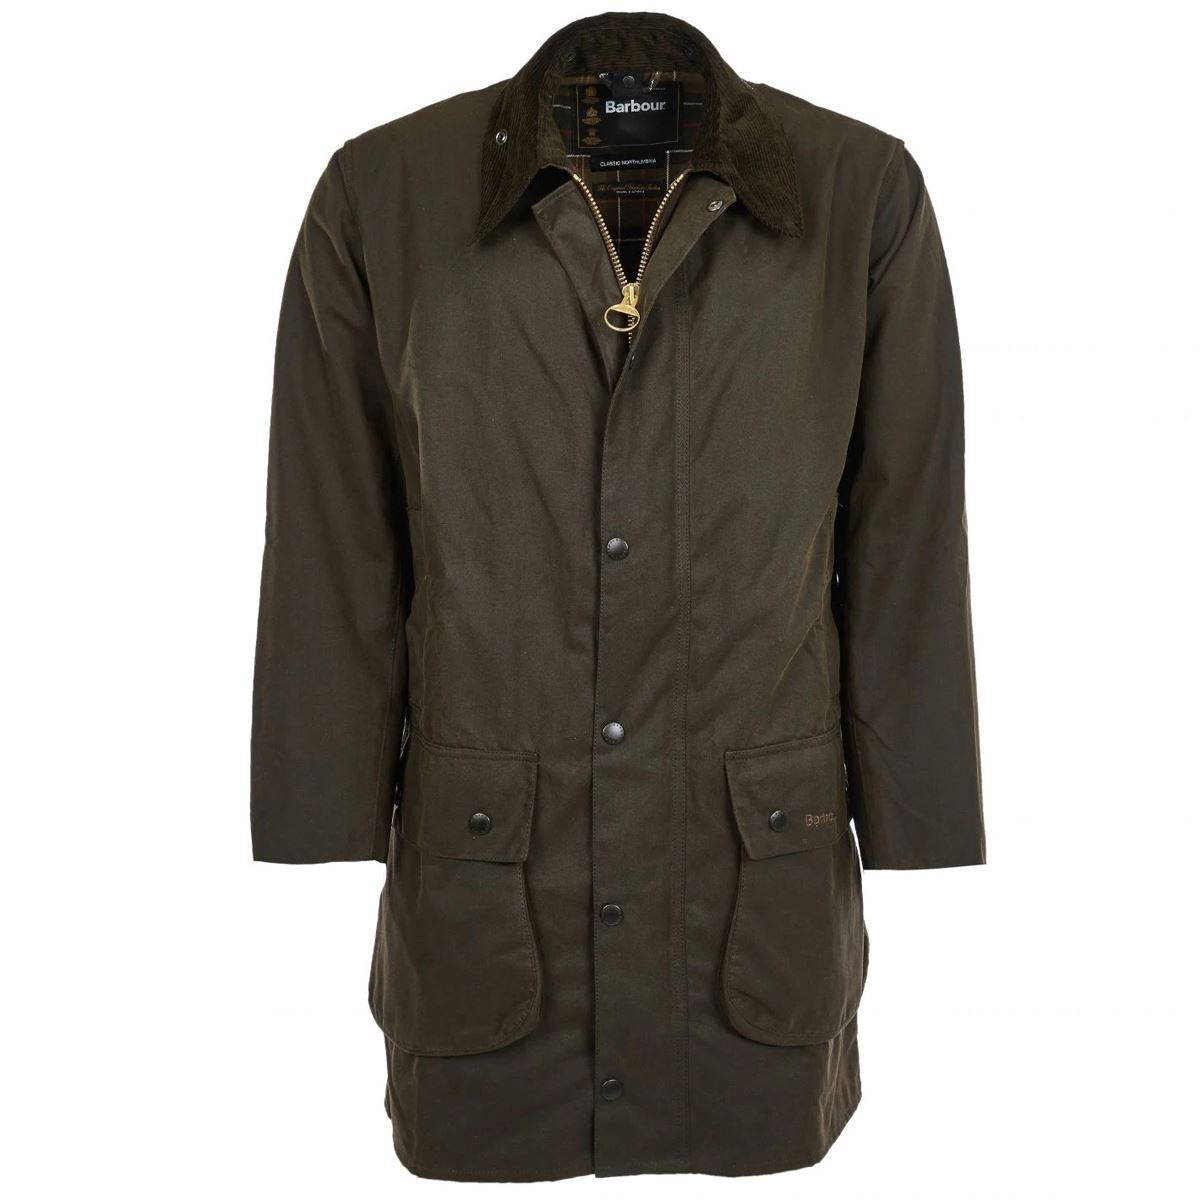 What fabric is the barbour northumbria wax jacket made of?